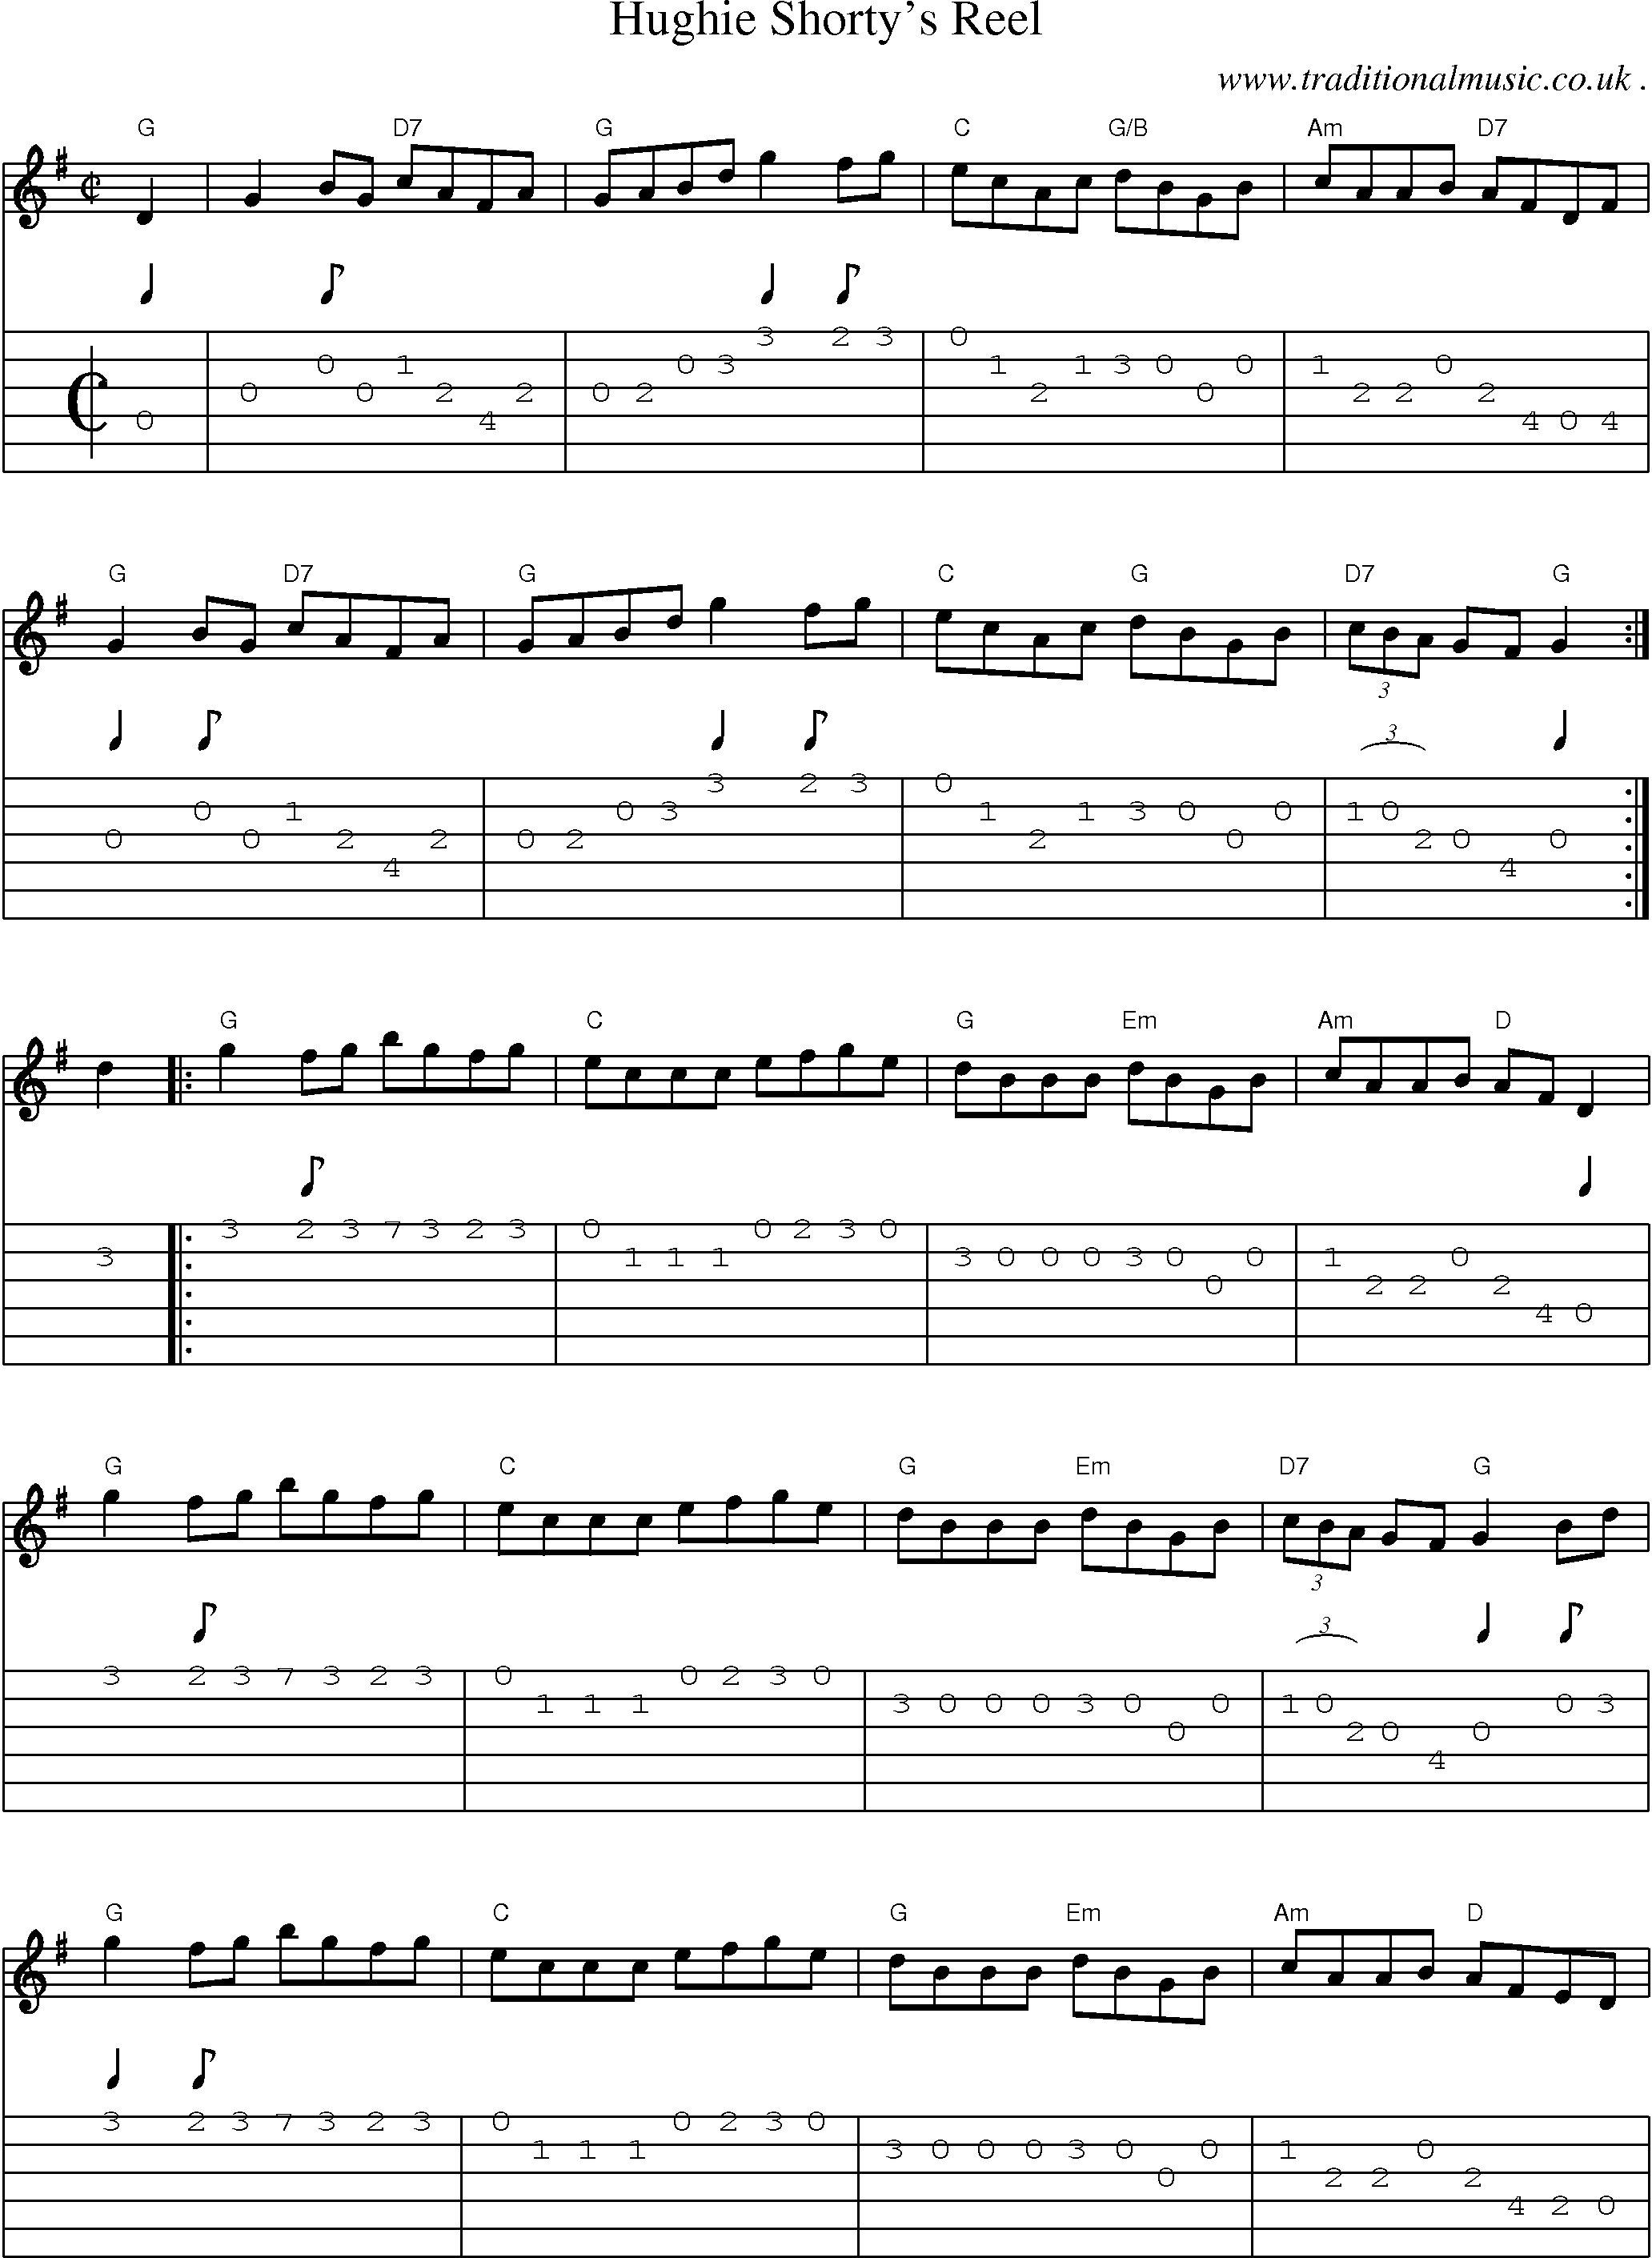 Music Score and Guitar Tabs for Hughie Shortys Reel